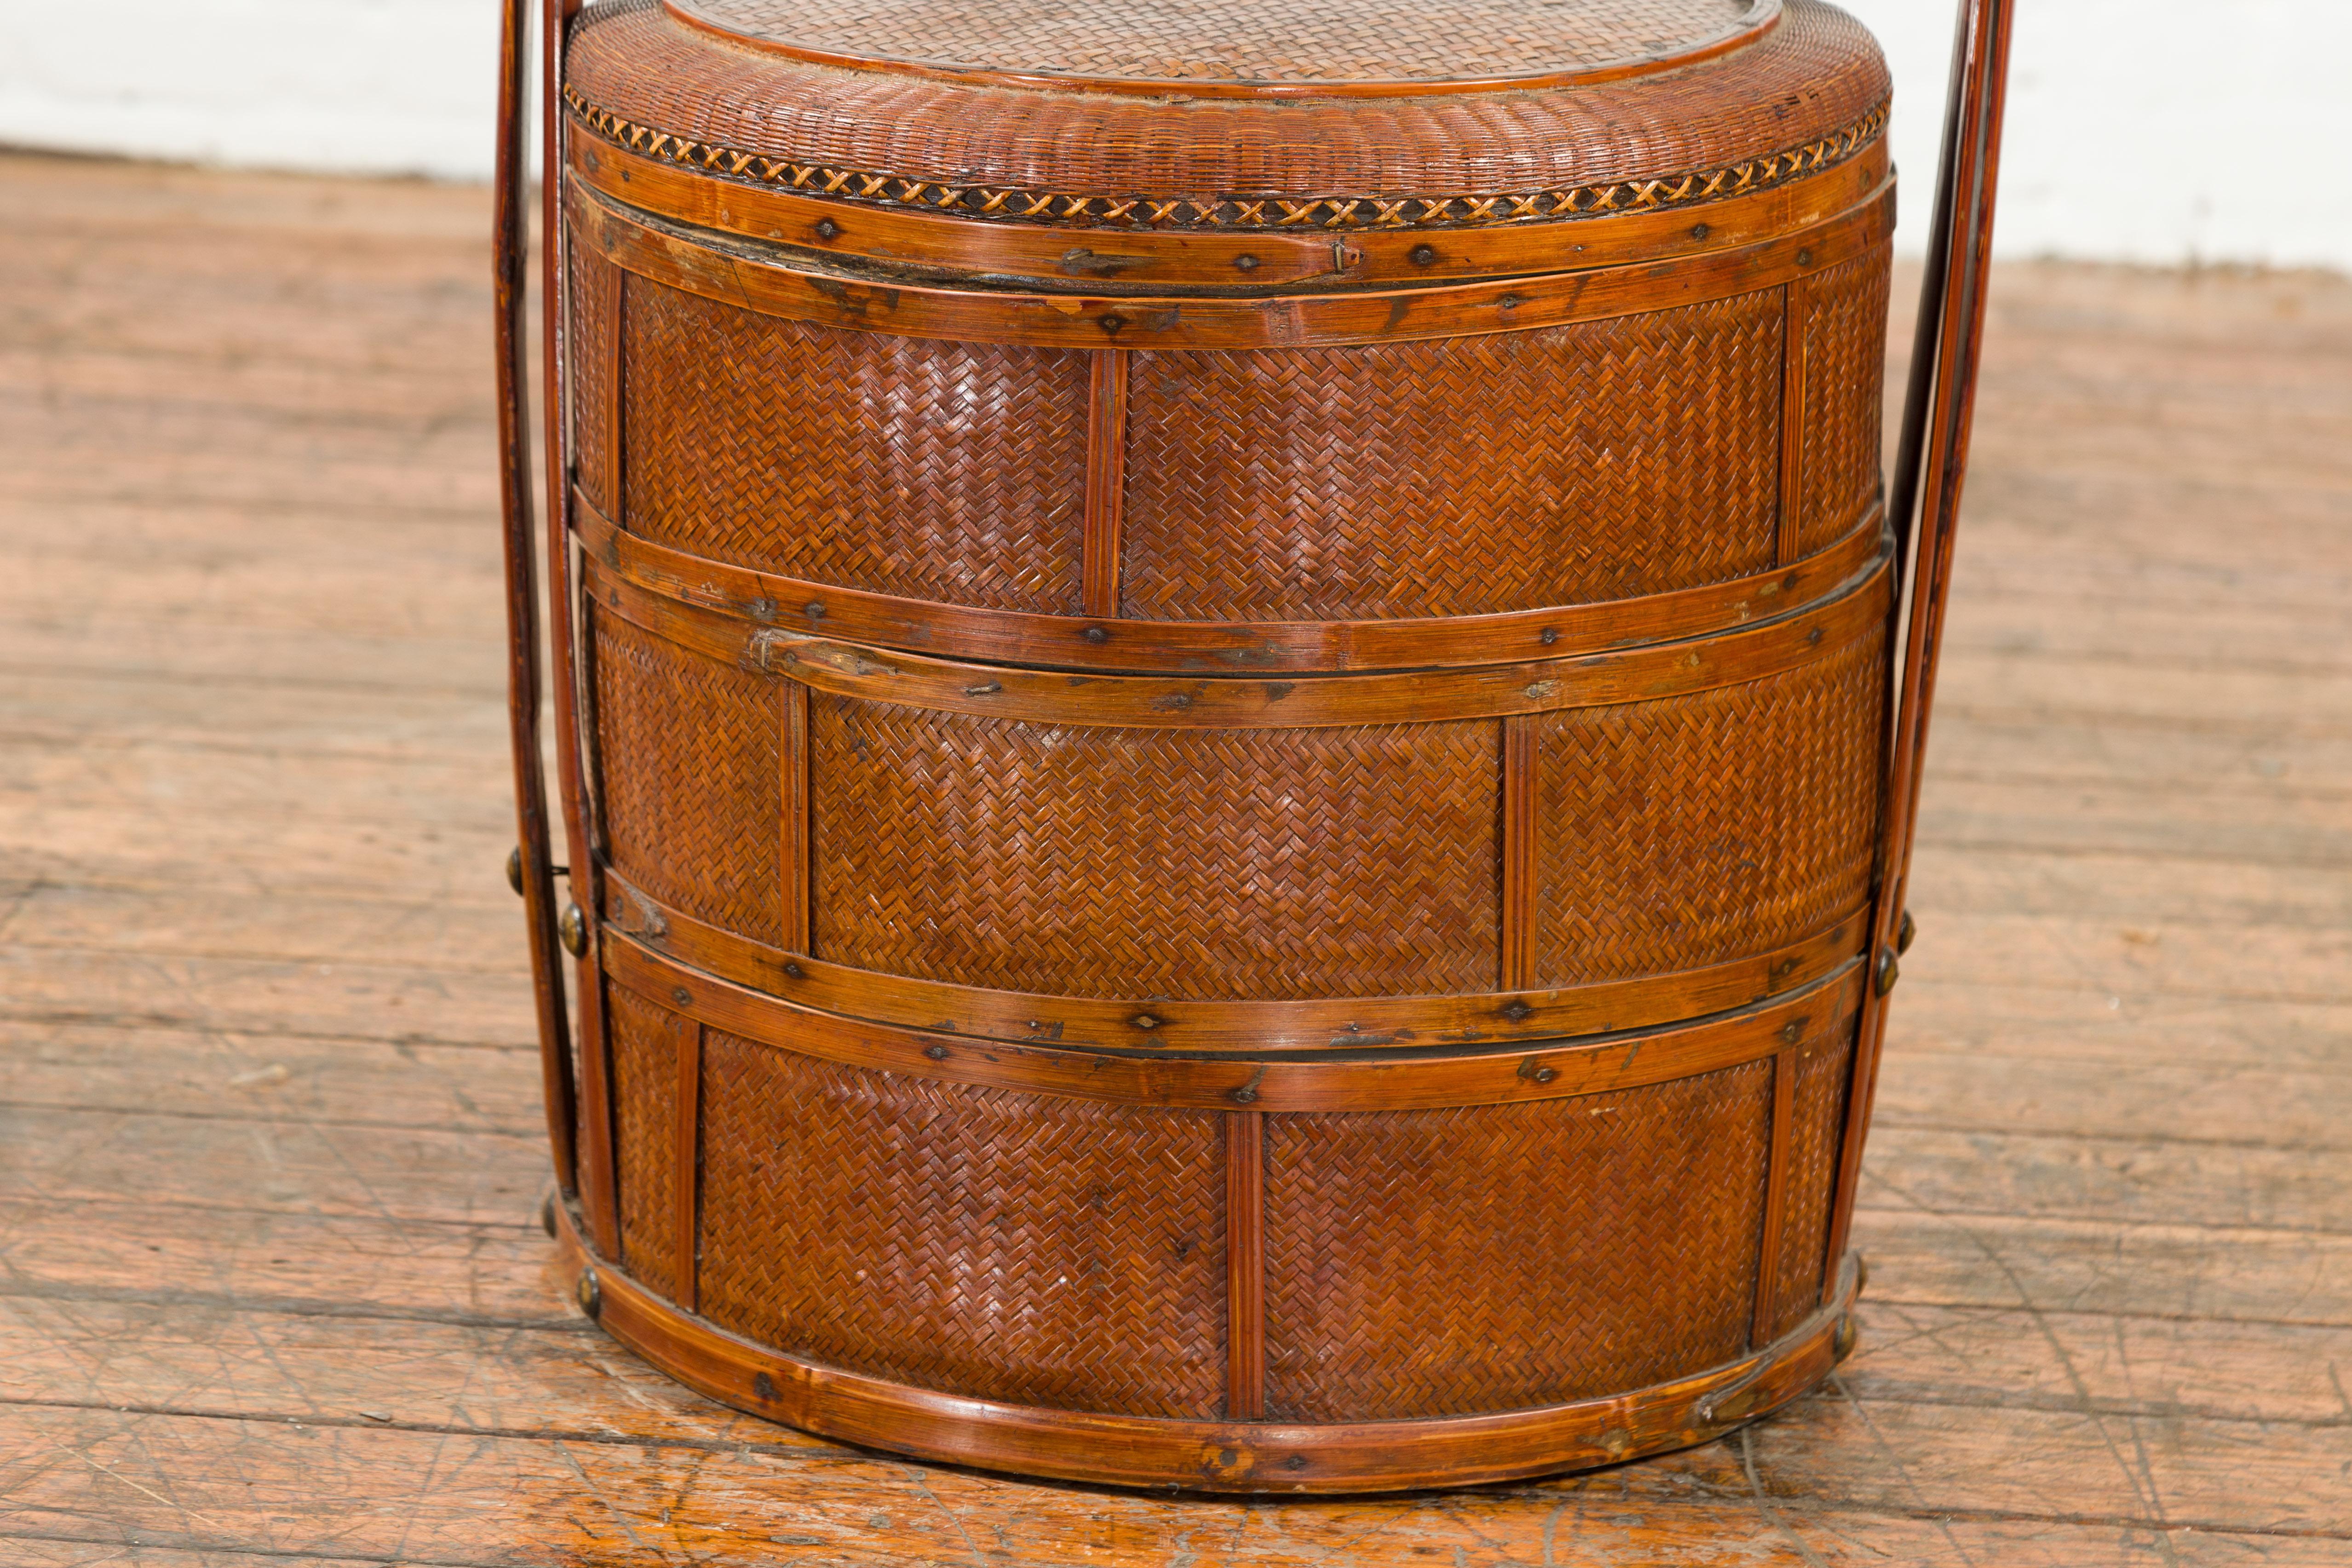 20th Century Chinese Nested Bamboo and Rattan Food Basket with Calligraphy and Iron Accents For Sale